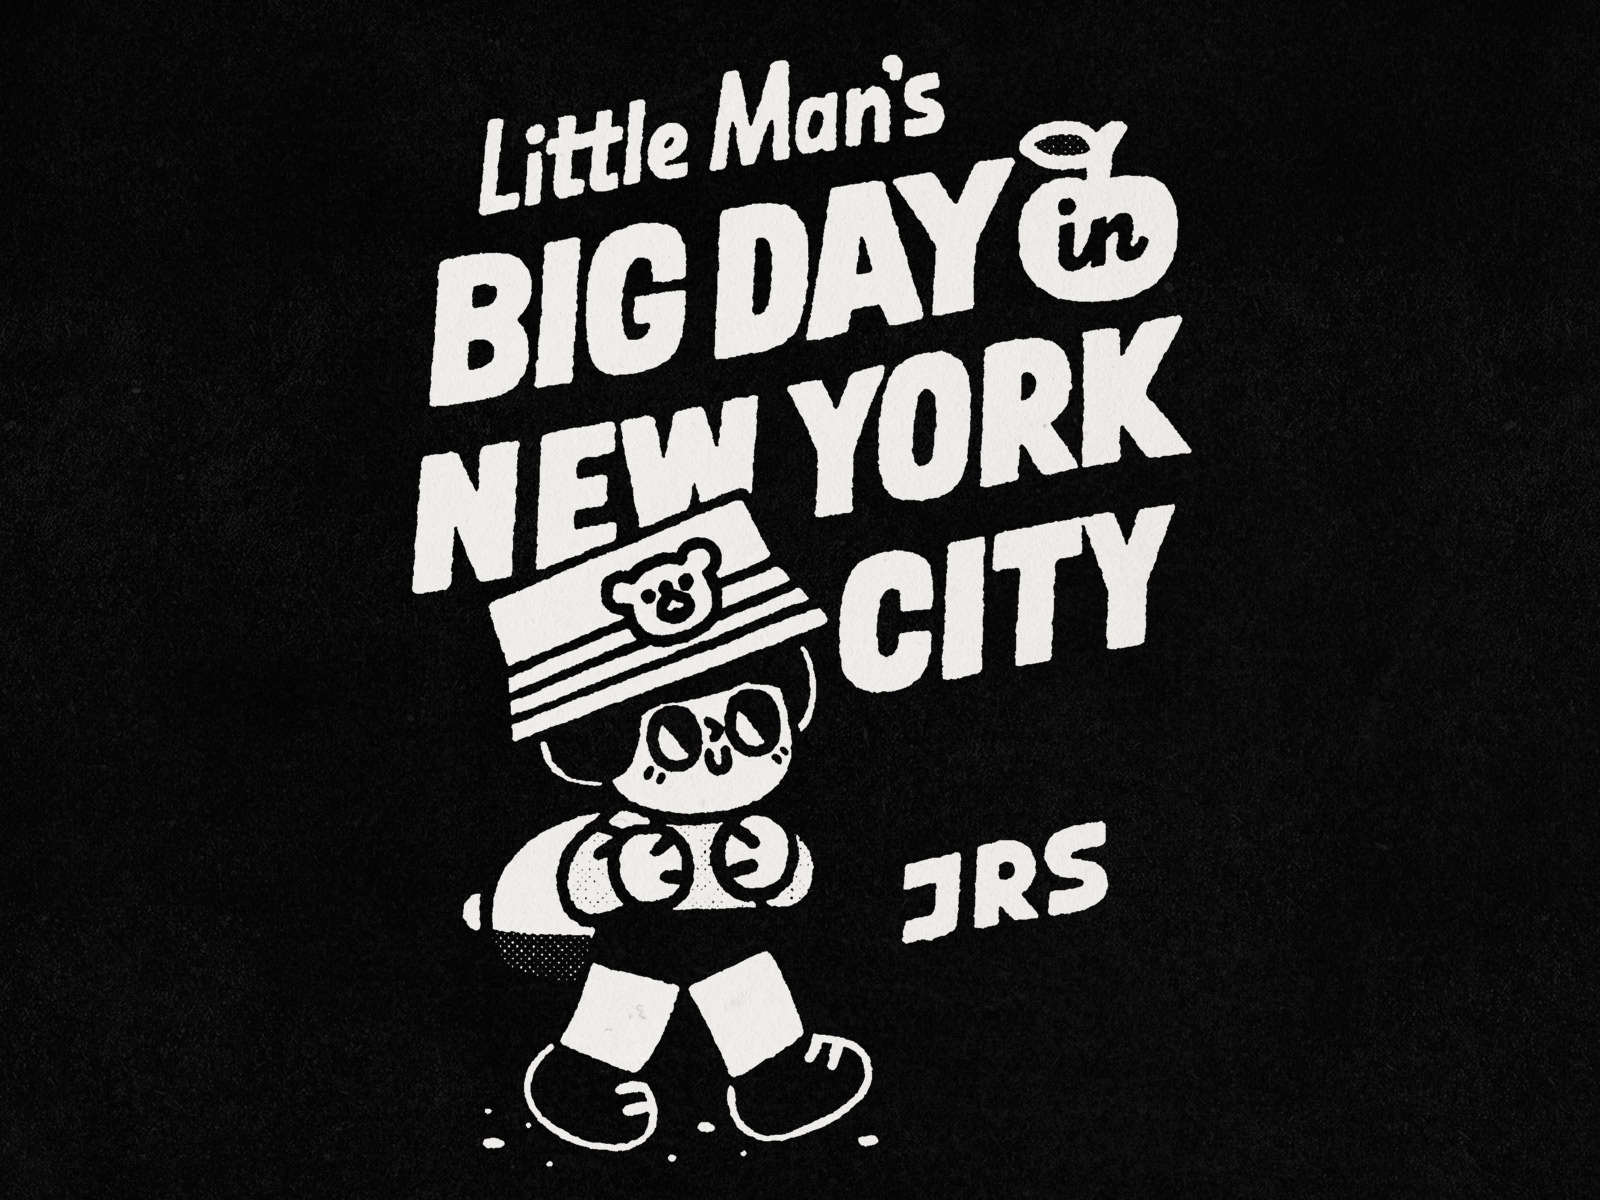 Little Man’s Big Day in New York City, JRS book cover boy cartoon cover cute design doodle fun illustration japanese jrs kawaii lettering little man new york typography usa